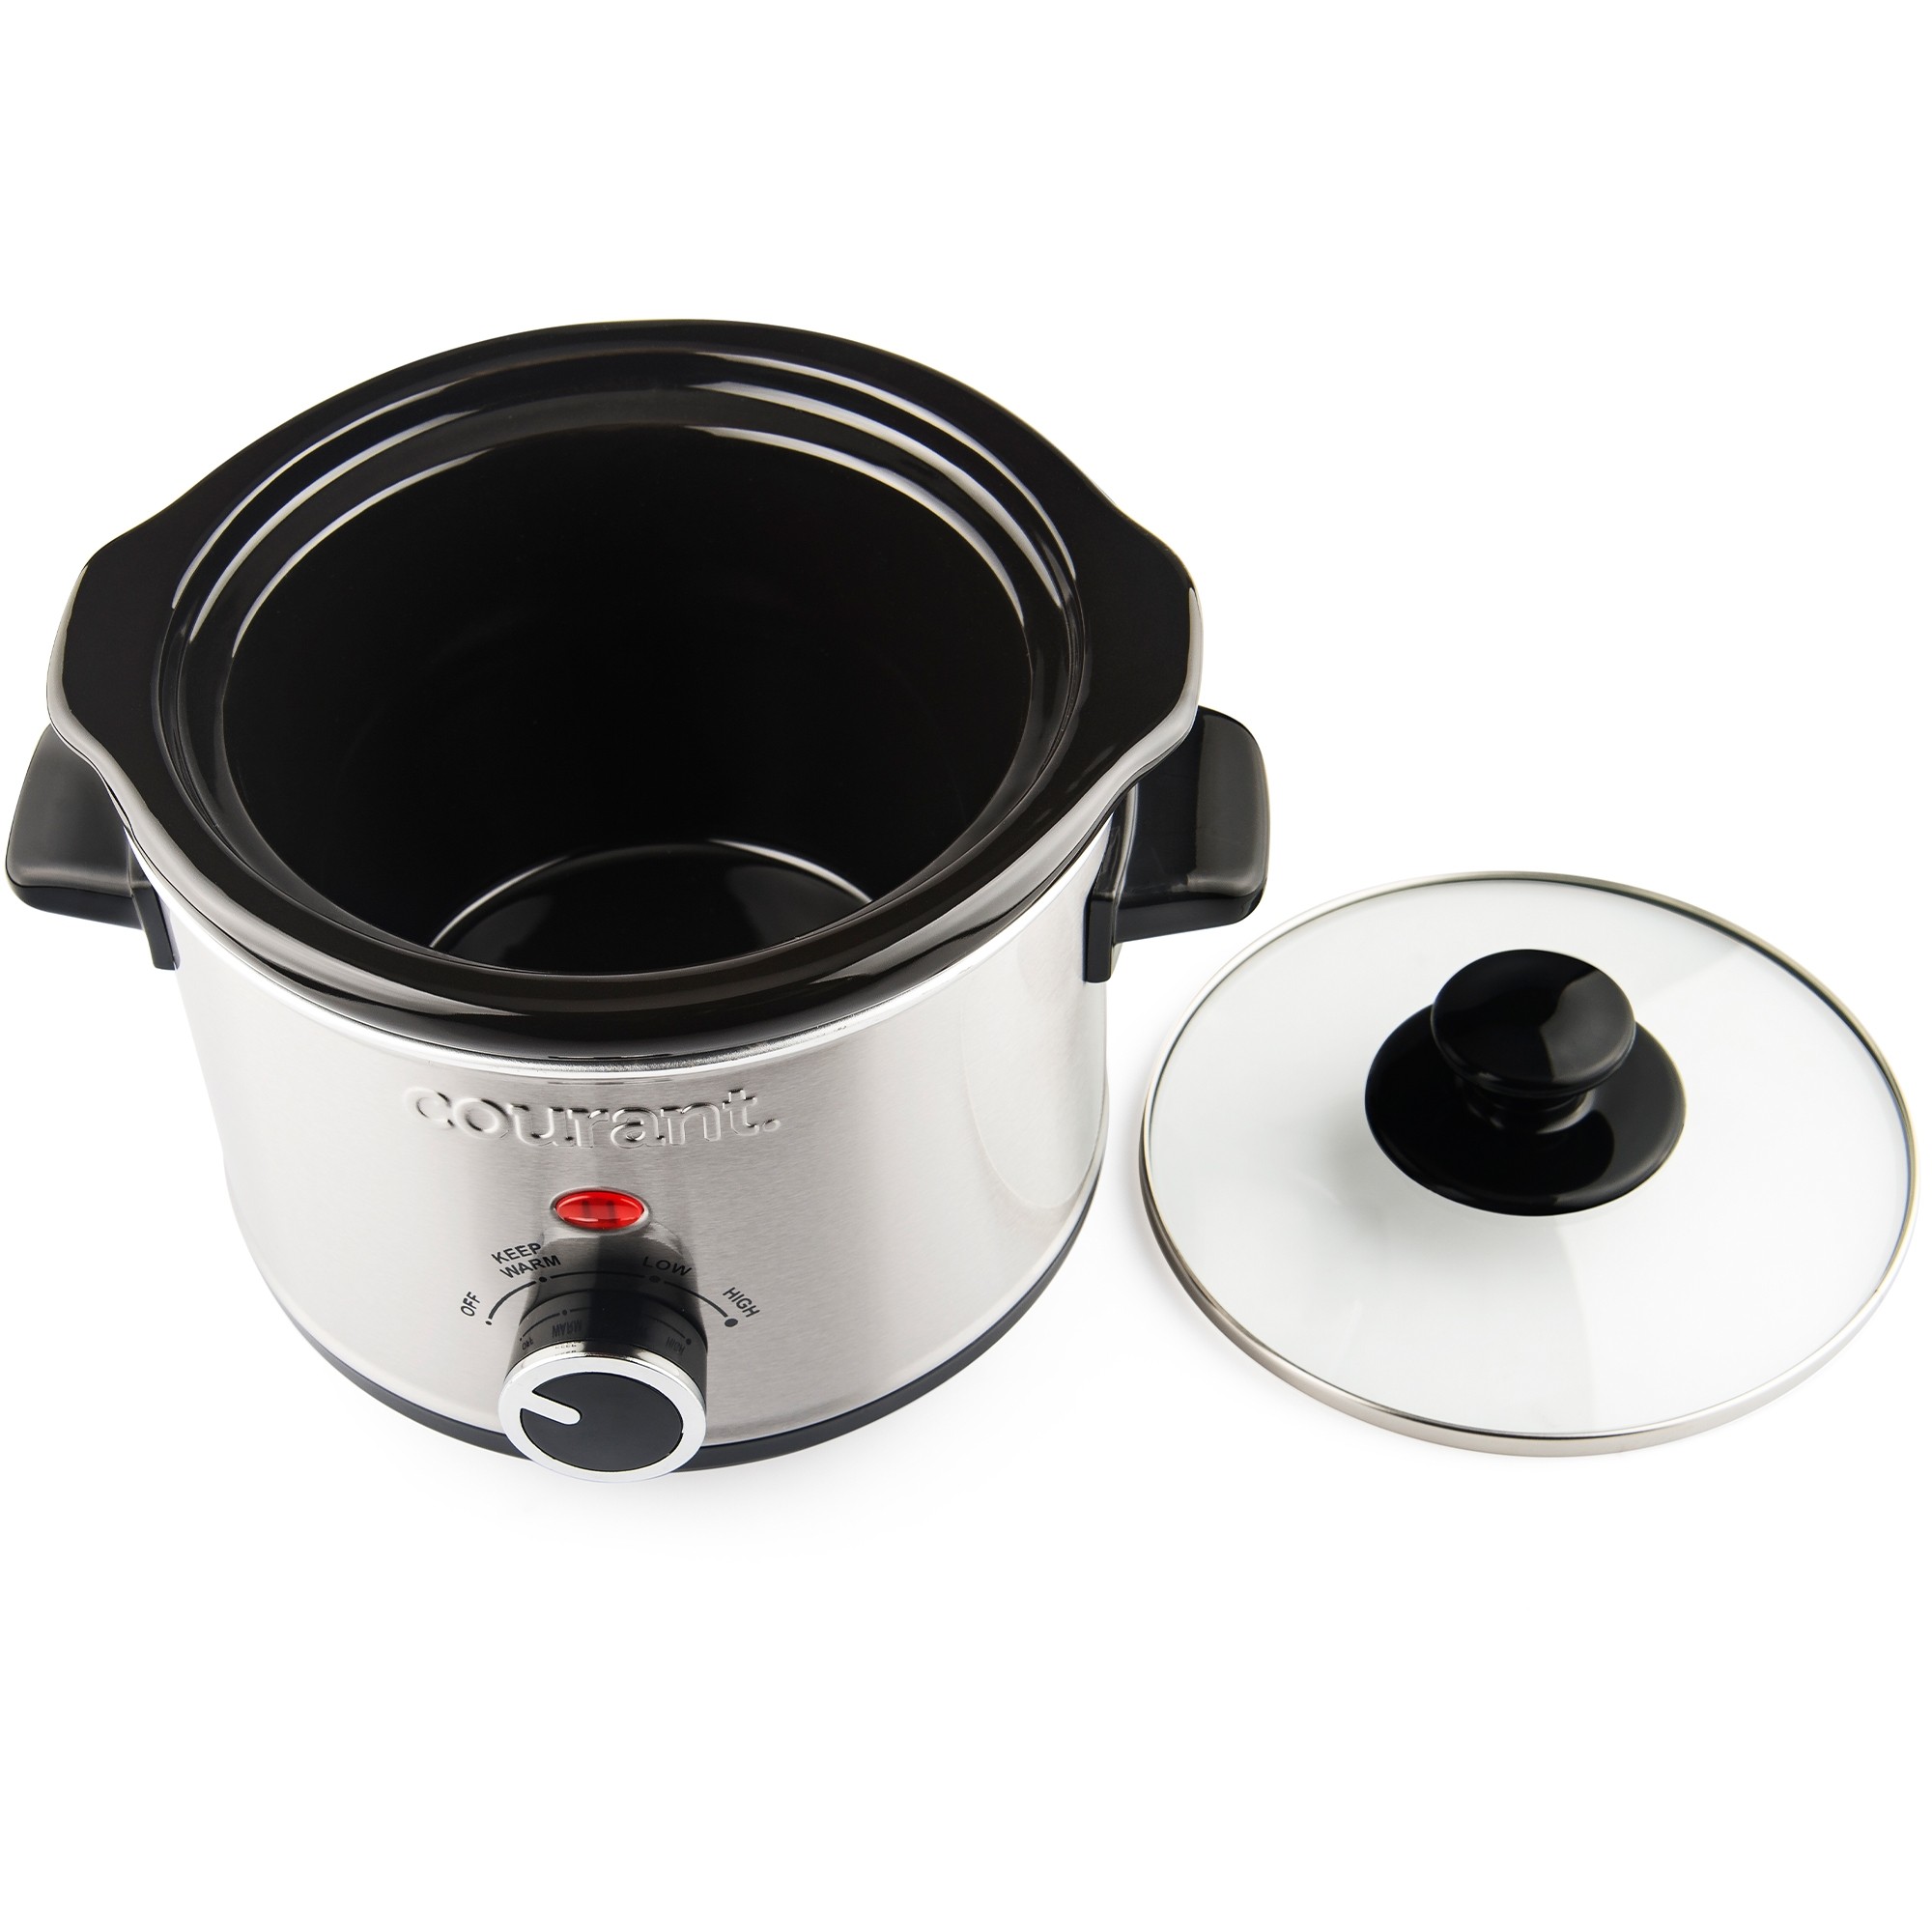 Eternal Stainless Steel Slow Cooker - 1.5 qt